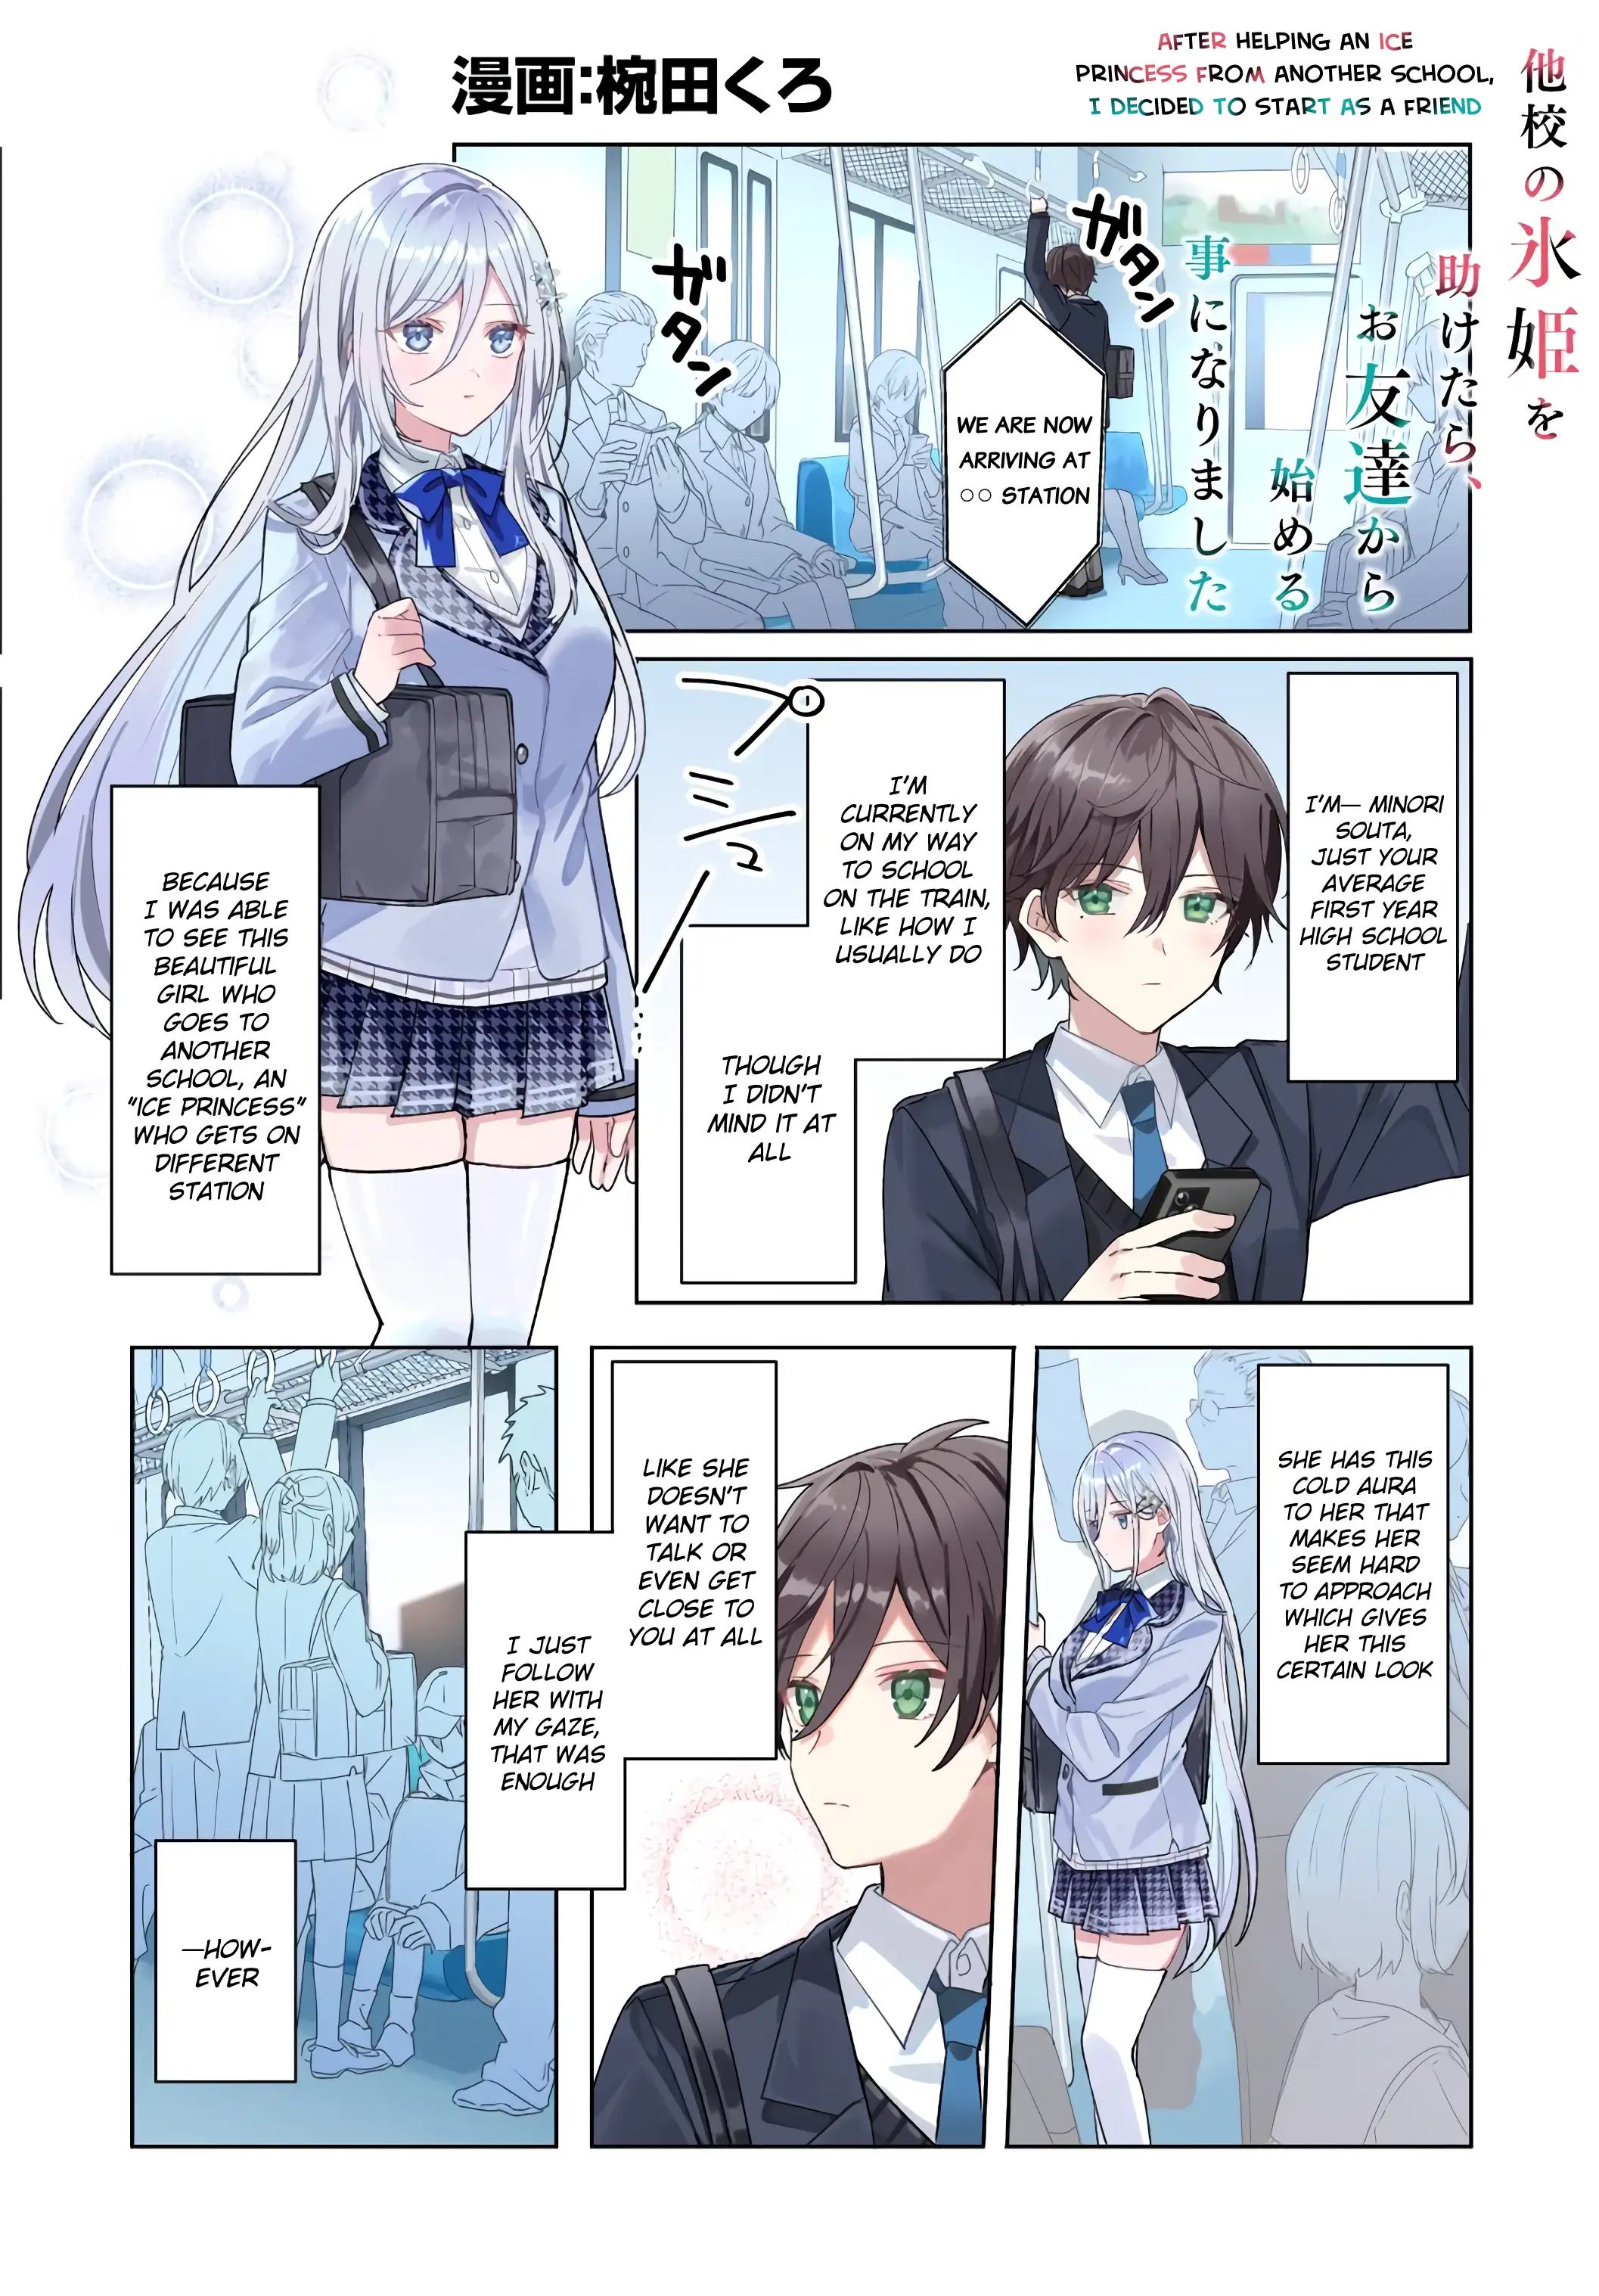 After I Save The Ice Princess From Another School From a Mol*ster, We Started as Friends - chapter 0 - #2